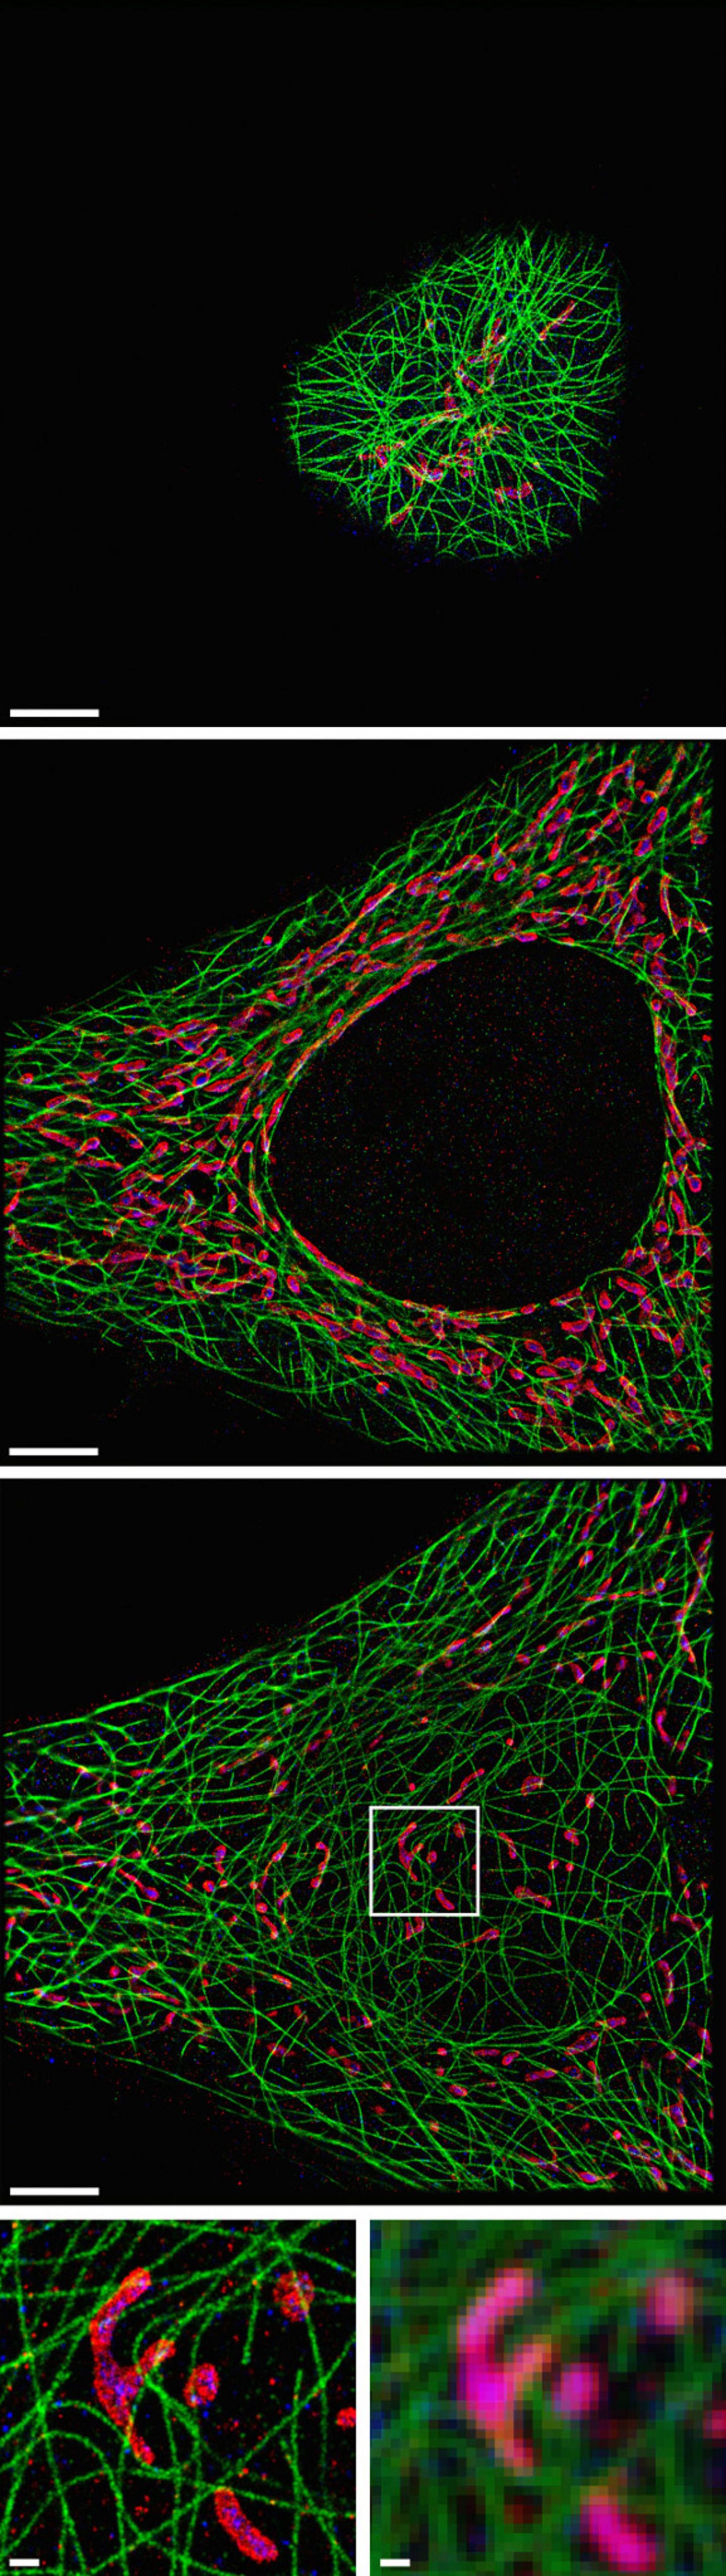 Super-Resolution Whole-Cell Imaging with Spinning Disc Confocal Microscopes